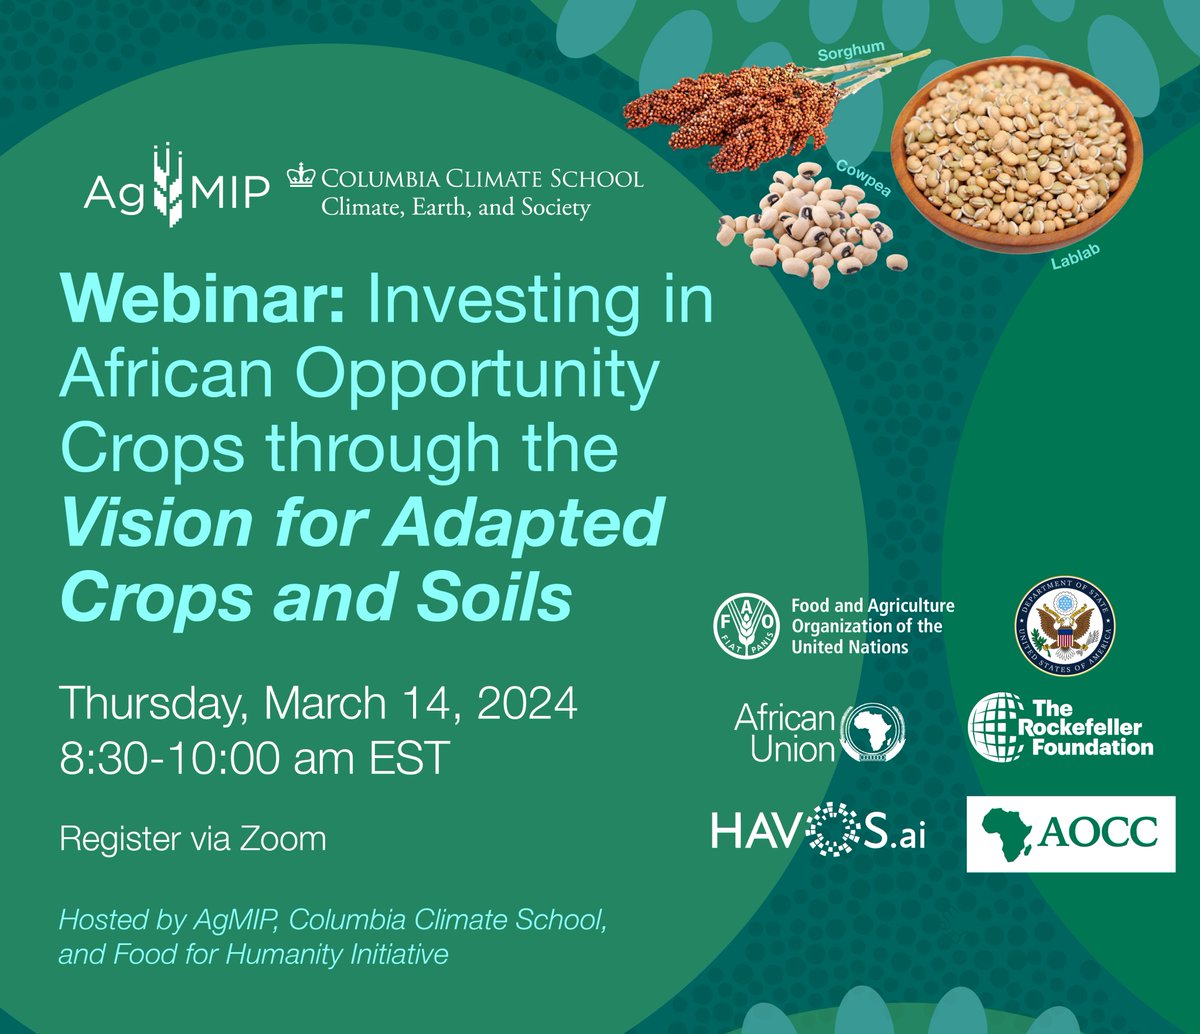 On Mar 14 8:30am ET, join @AgMIPnews, @columbiaclimate, Food for Humanity Initiative for webinar on amazing work of advancing more climate-resilient, nutritious food systems in Africa through the Vision for Adapted Crops and Soils project. Learn more/RSVP: climate.columbia.edu/events/investi…